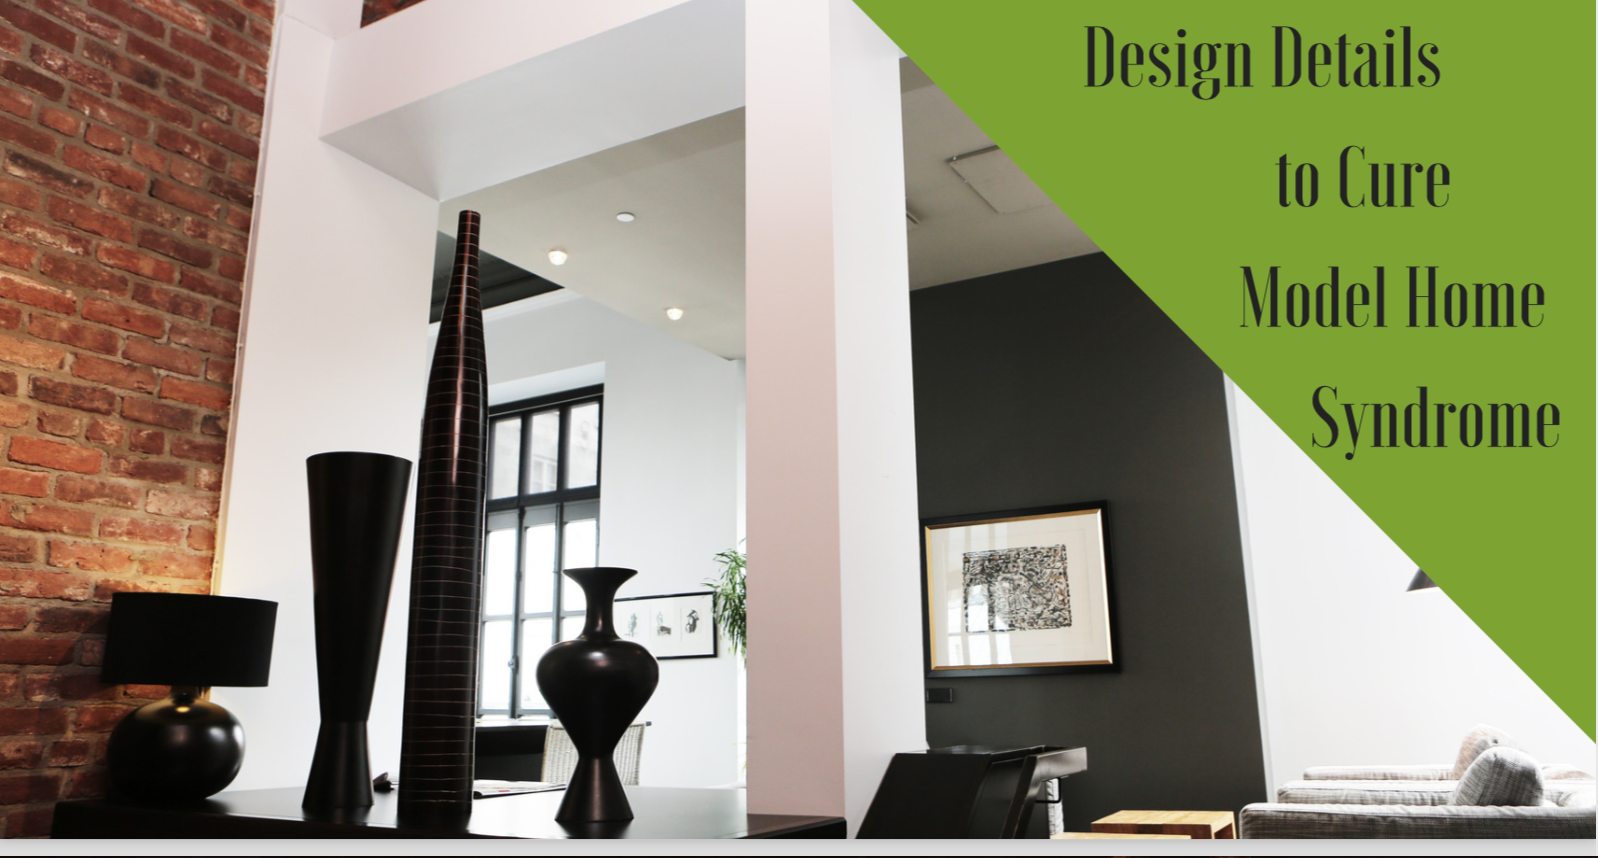 Design Details to Cure Model Home Syndrome